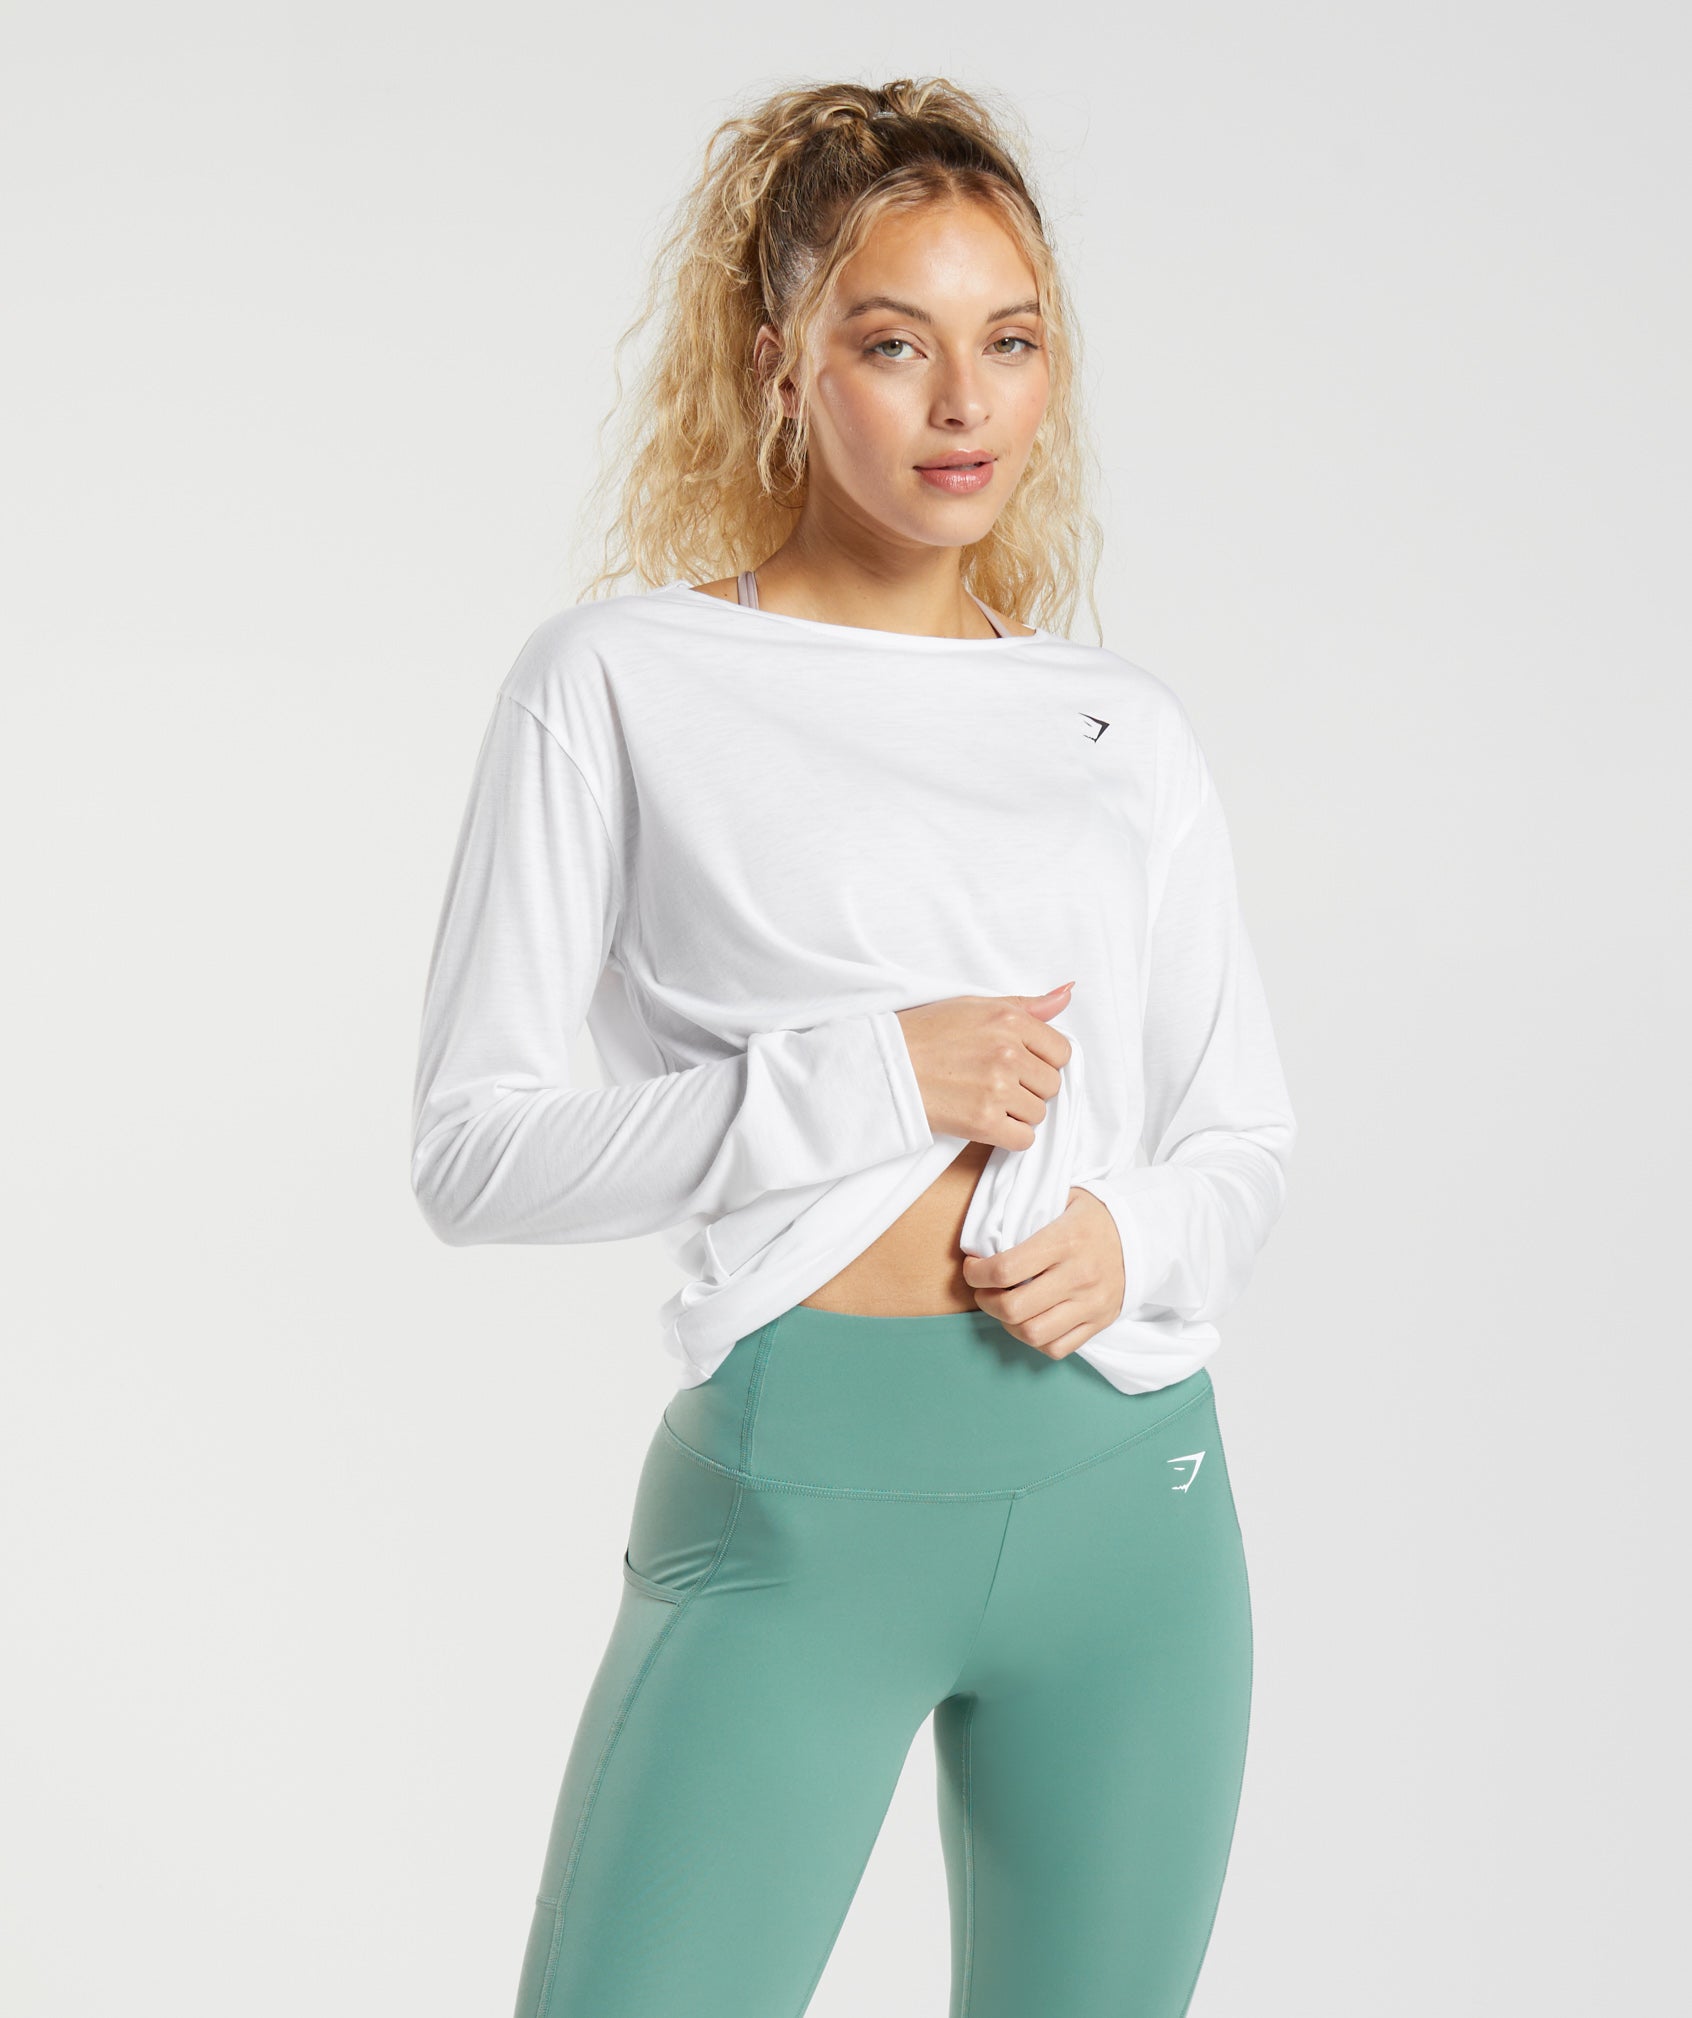 Gymshark on X: Relaxation never felt so good. You're guaranteed consistent  comfort on your rest day in the Slounge Crop top. Training or having a  well-deserved rest day?   / X